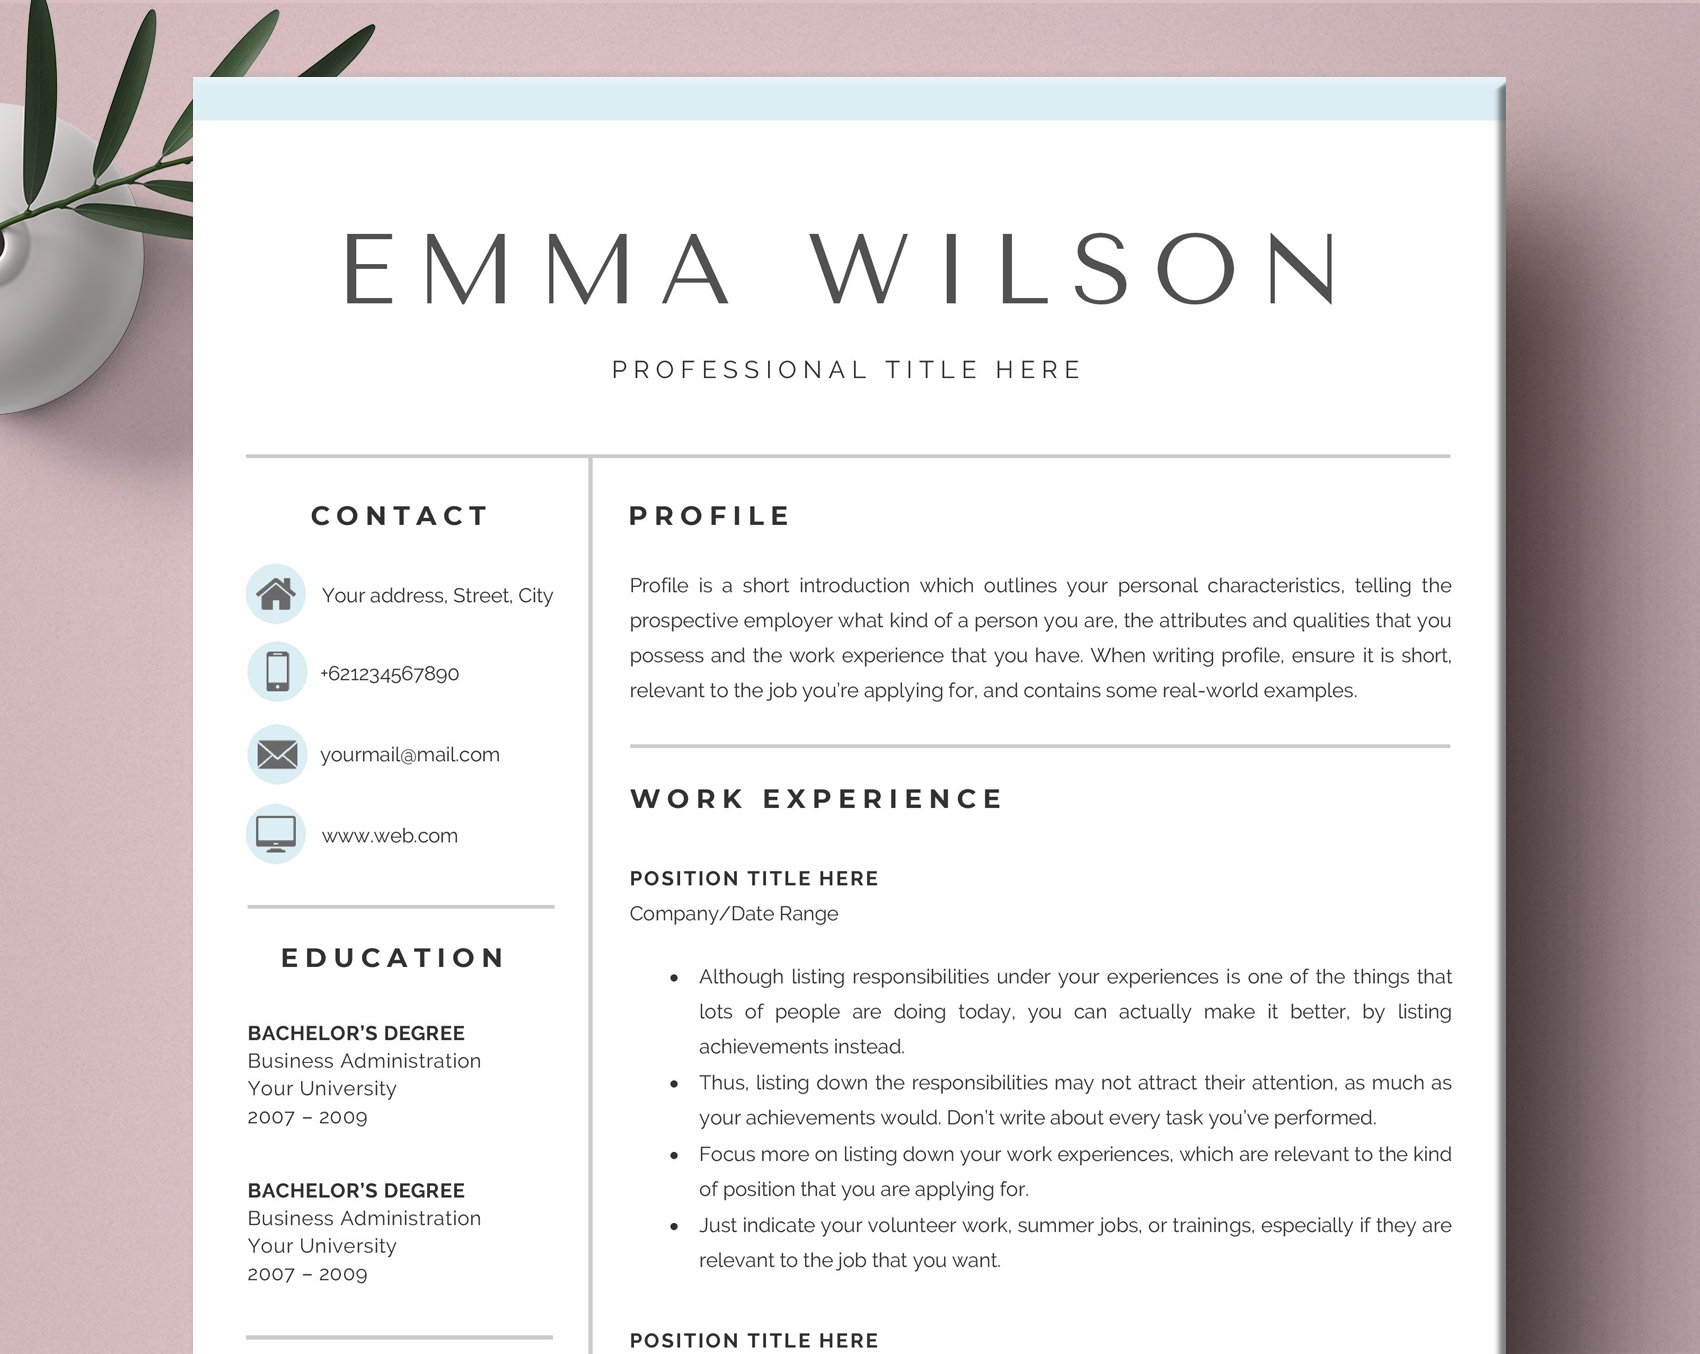 5 Page Resume Template / CV Word cover image.